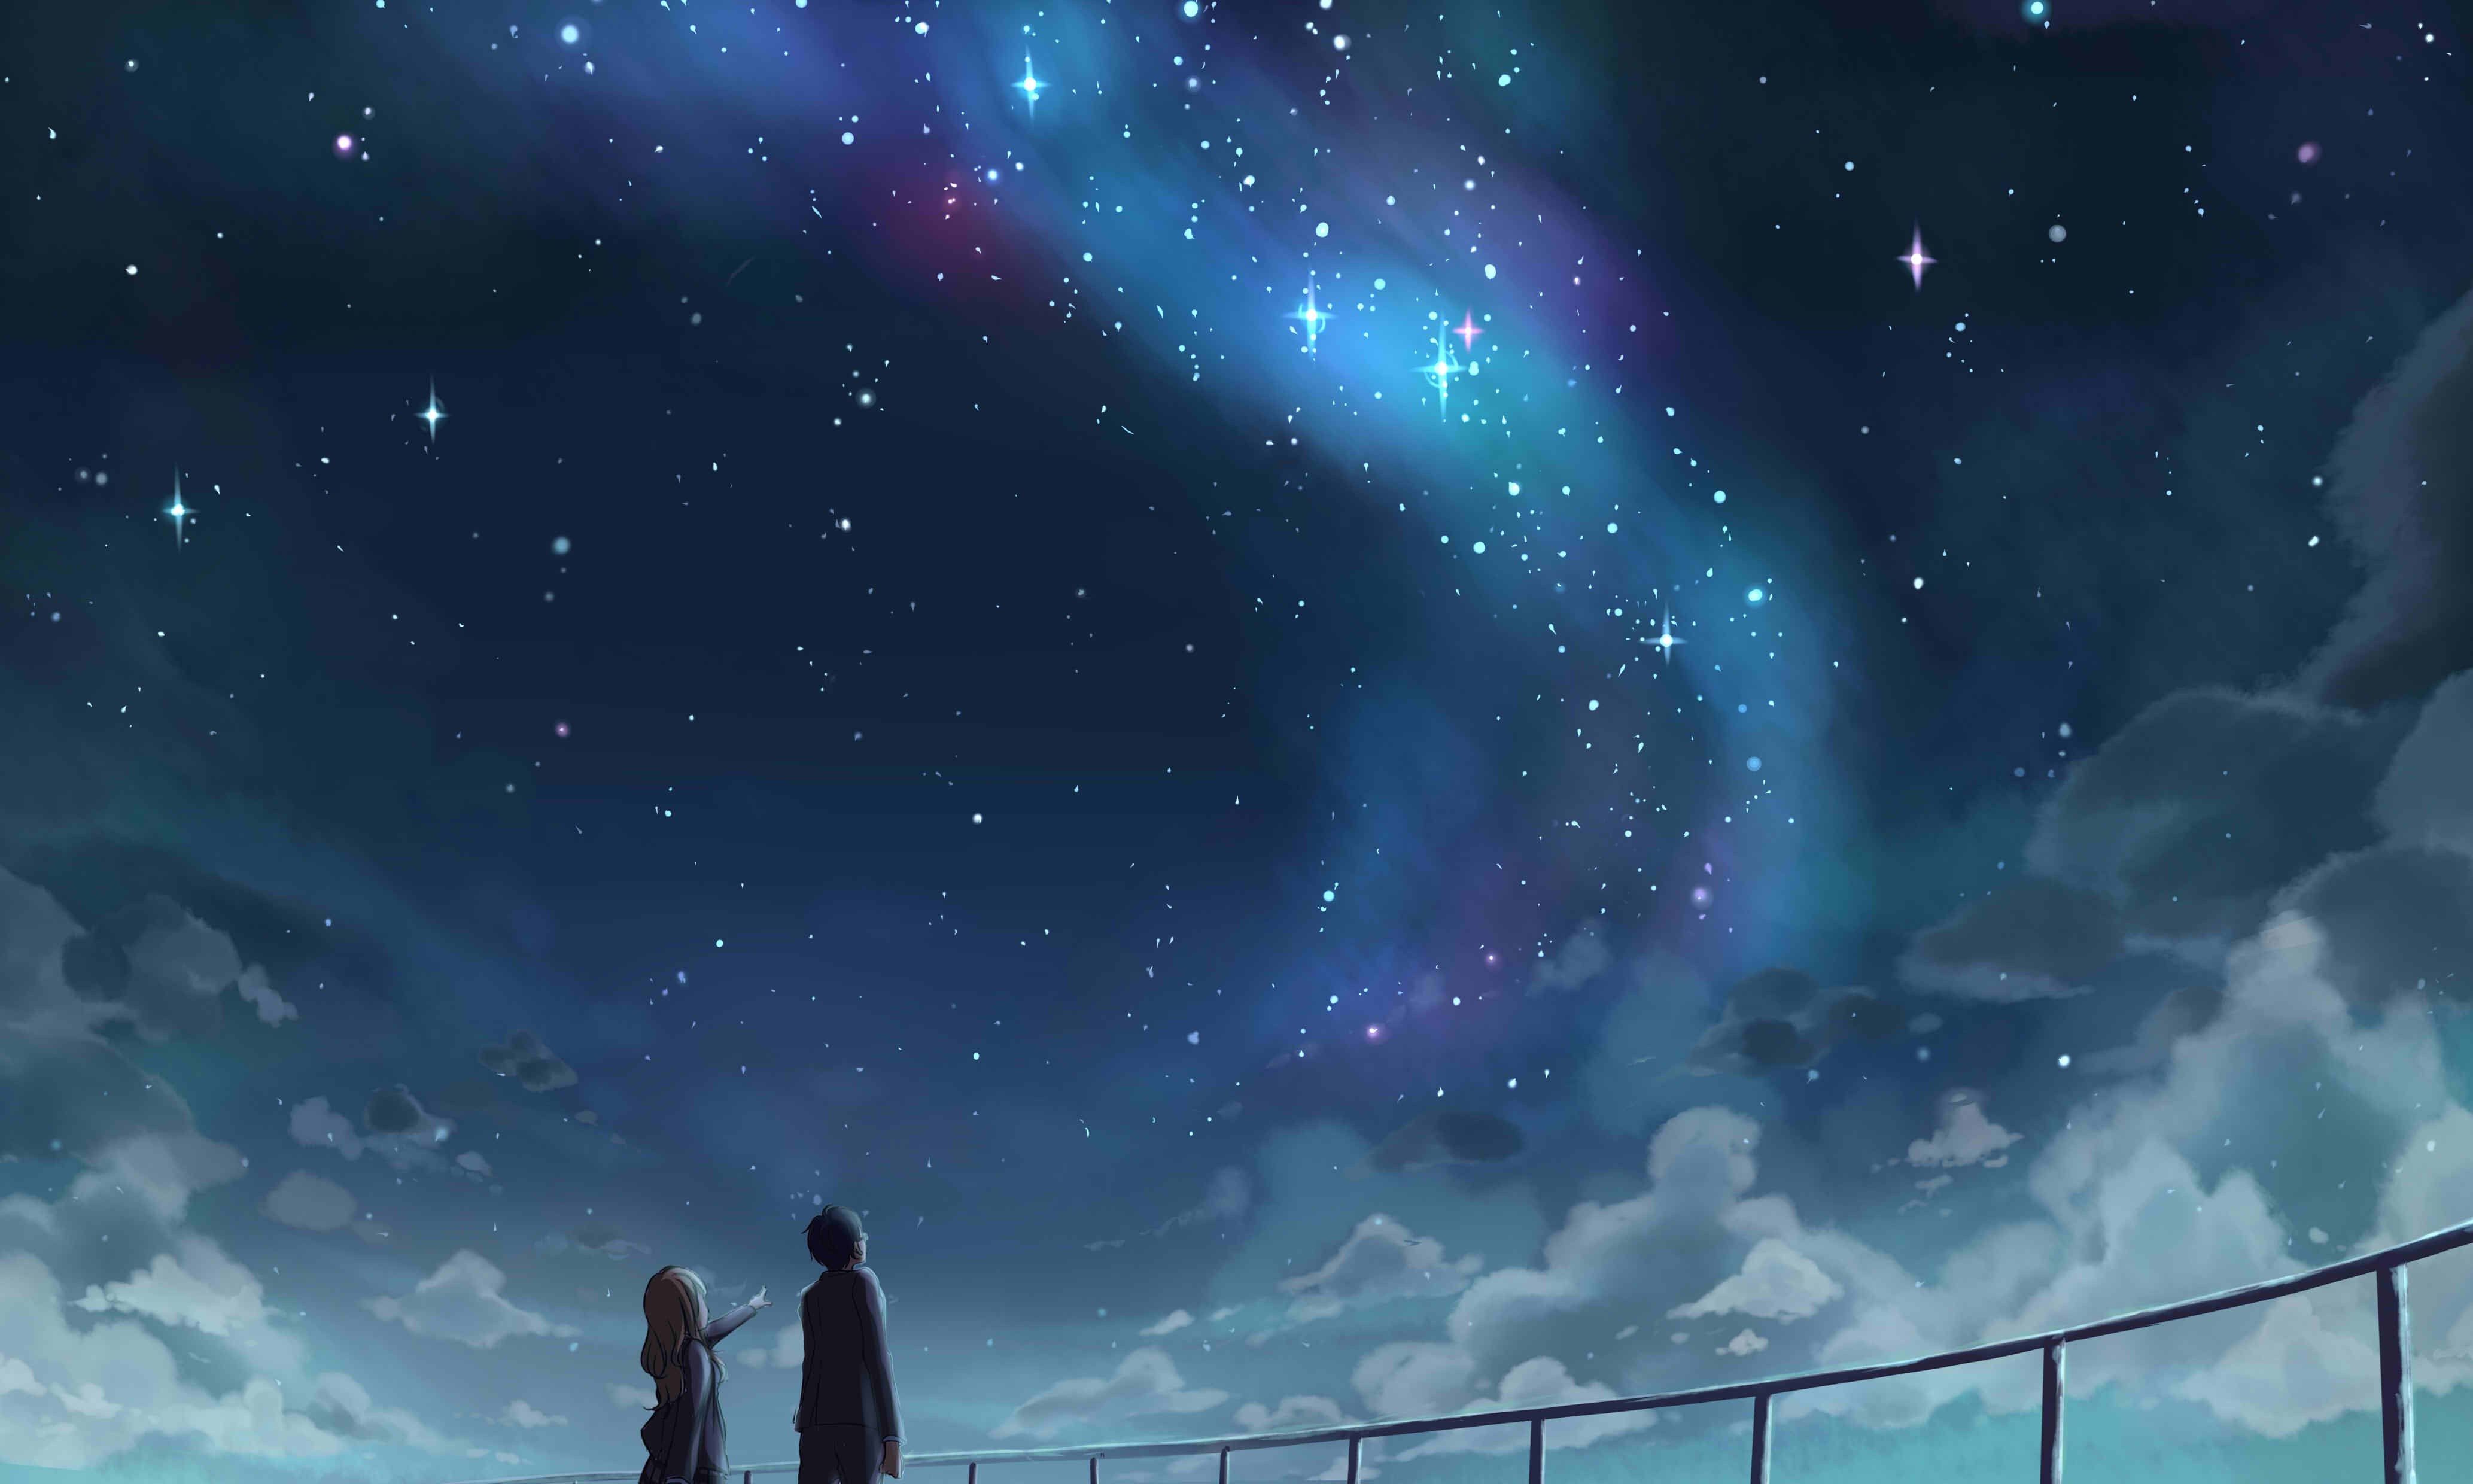 Anime couple looking at the stars - Blue anime, anime